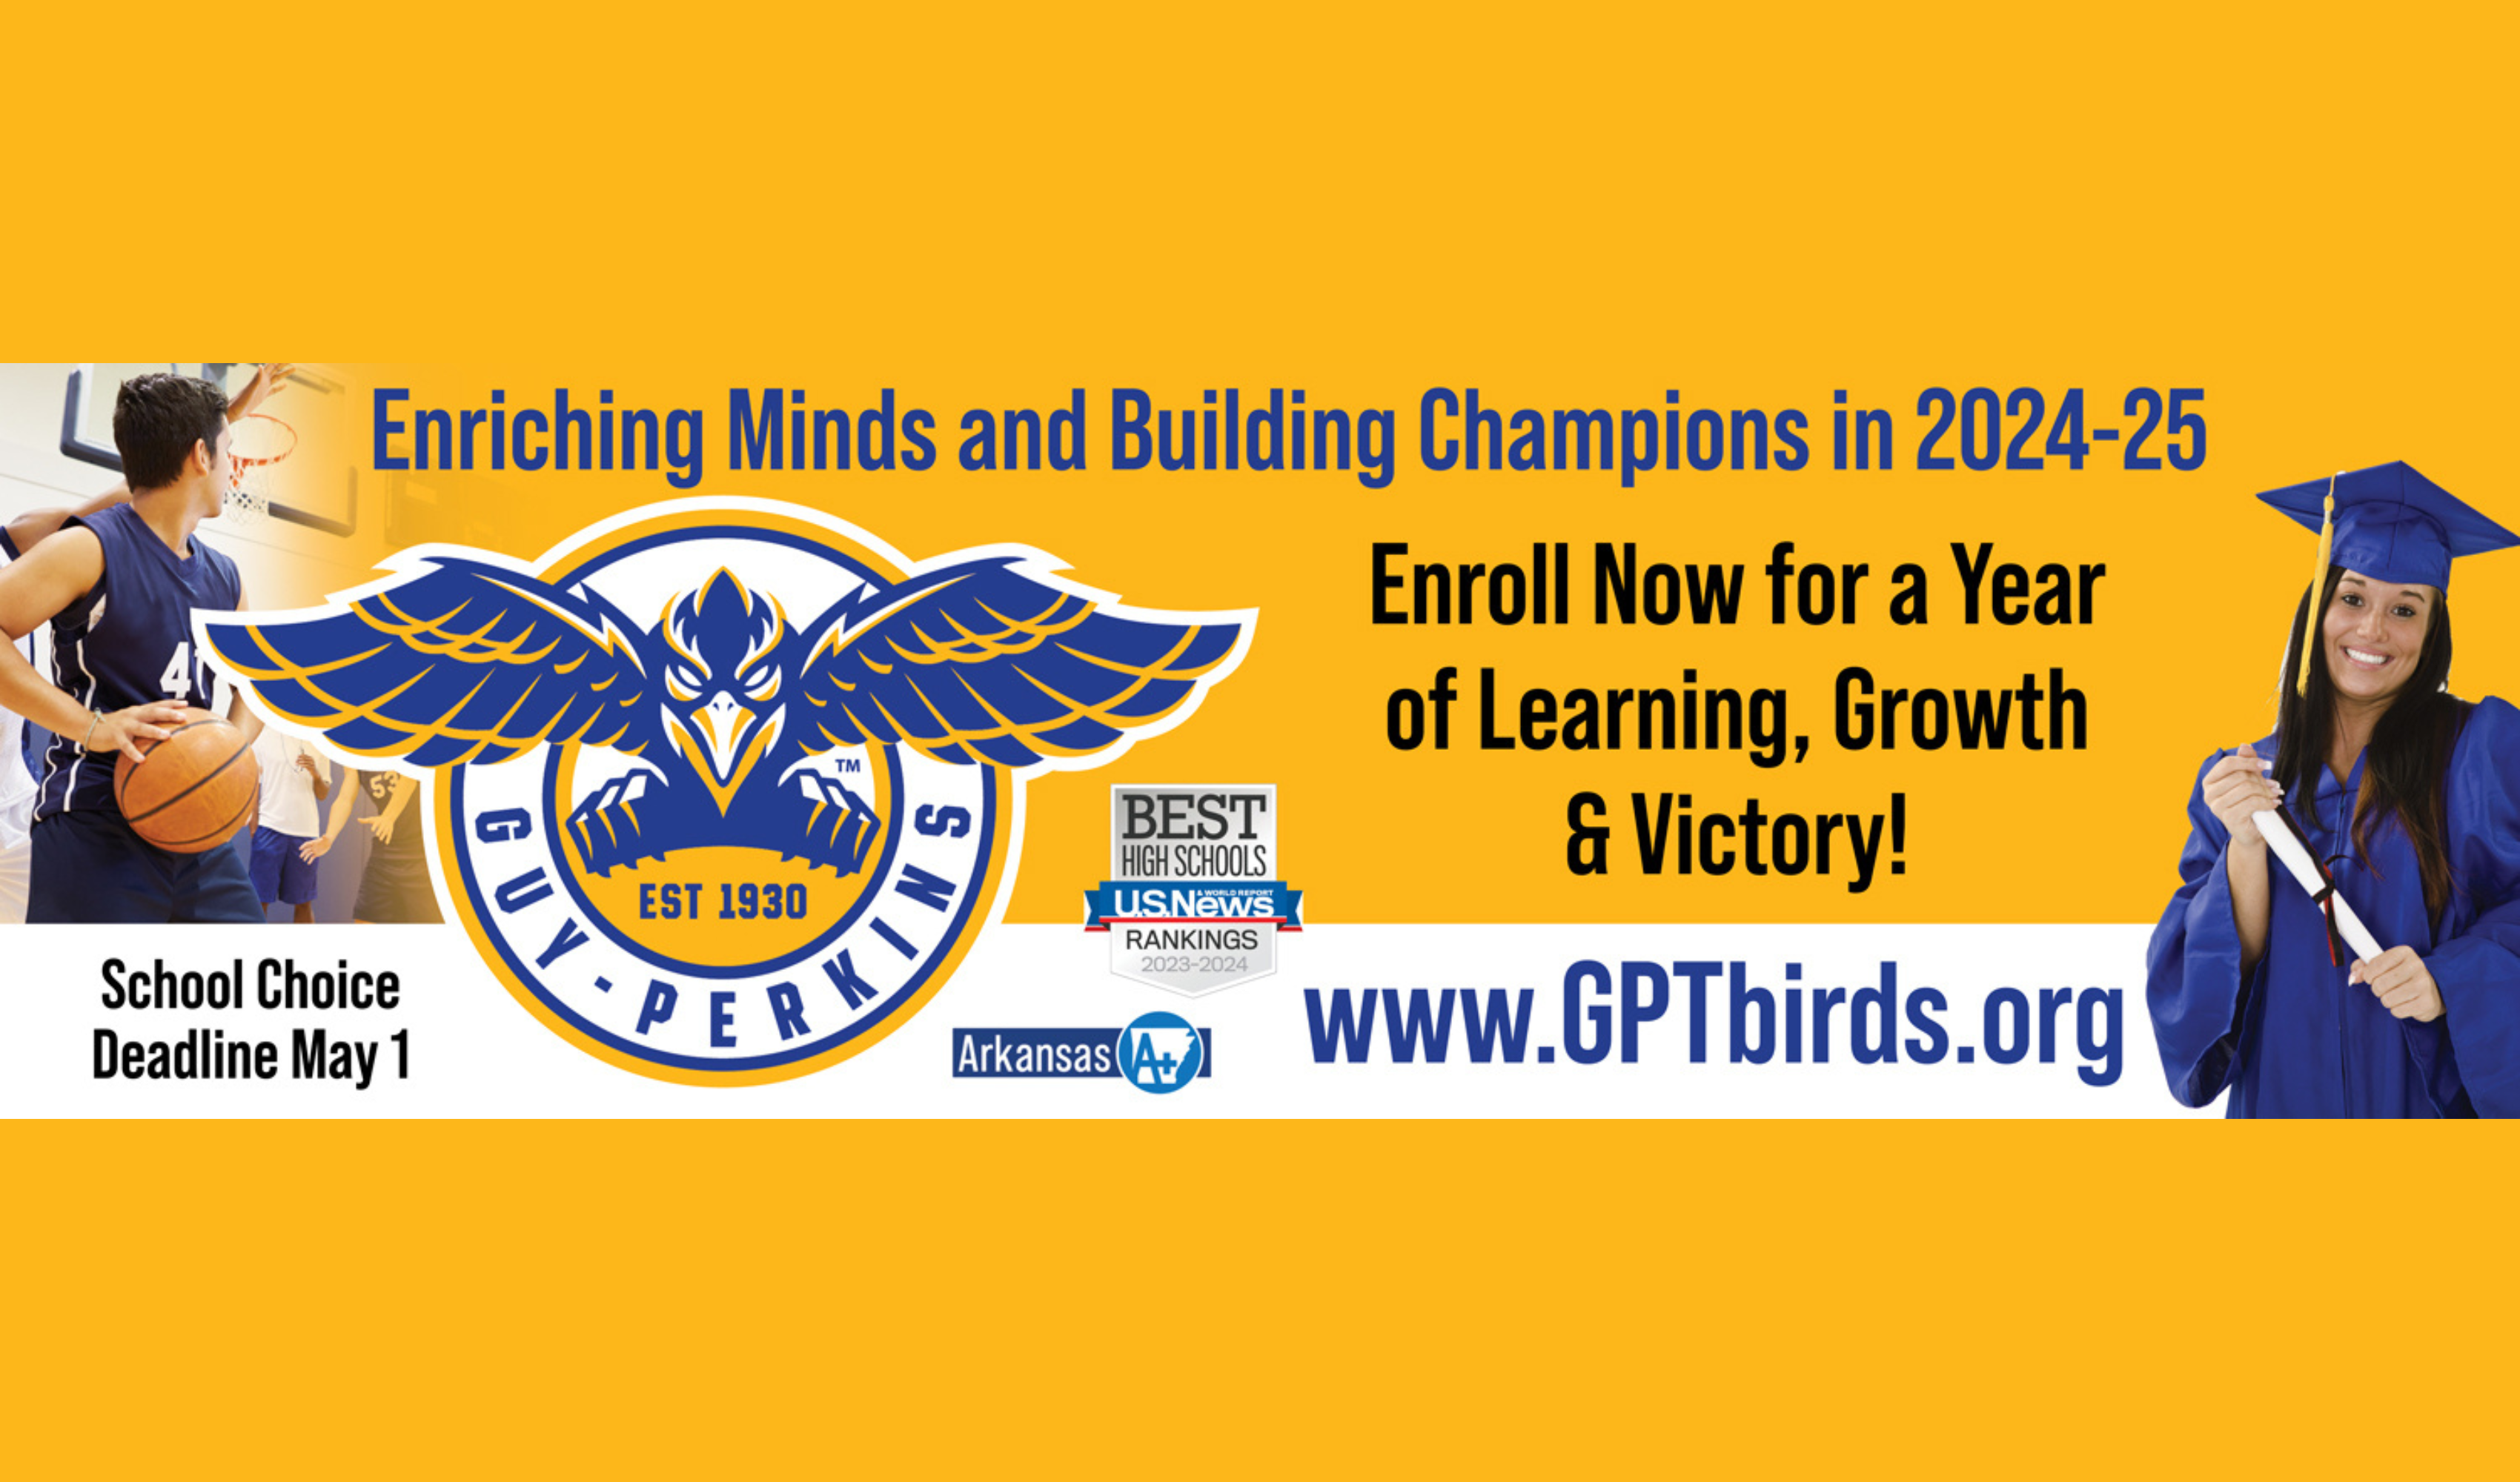 Enriching Minds and Building Champions in 2024-25 Enroll Now for a Year of Learning, Growth and Victory! www.GPTBirds.org School Choice Deadline May 1